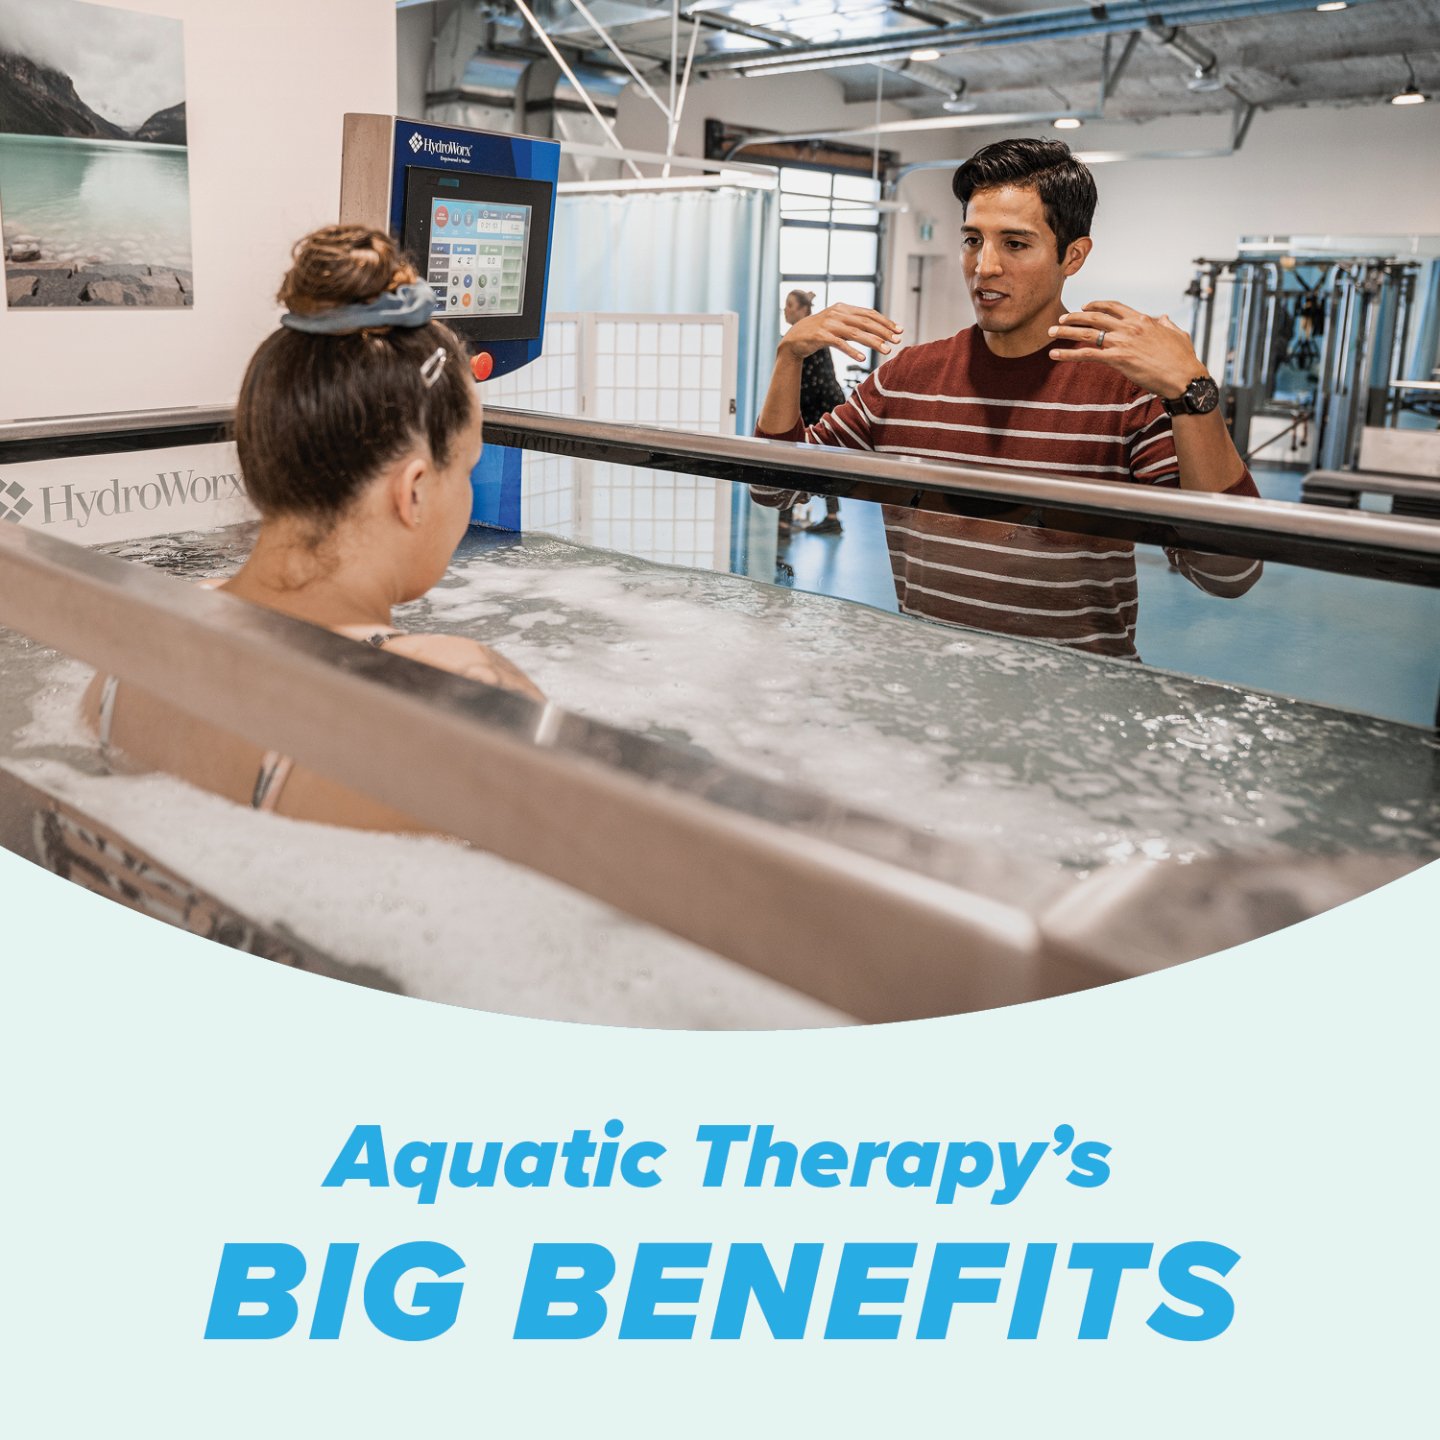 At Hydrathletics we are BIG fans of Aquatic Therapy for a broad range of concerns and goals. Visit our website (link in bio) to learn more or read on for just a few top reasons to book this low-impact therapy:

🚀 Accelerated Recovery
Water&rsquo;s b